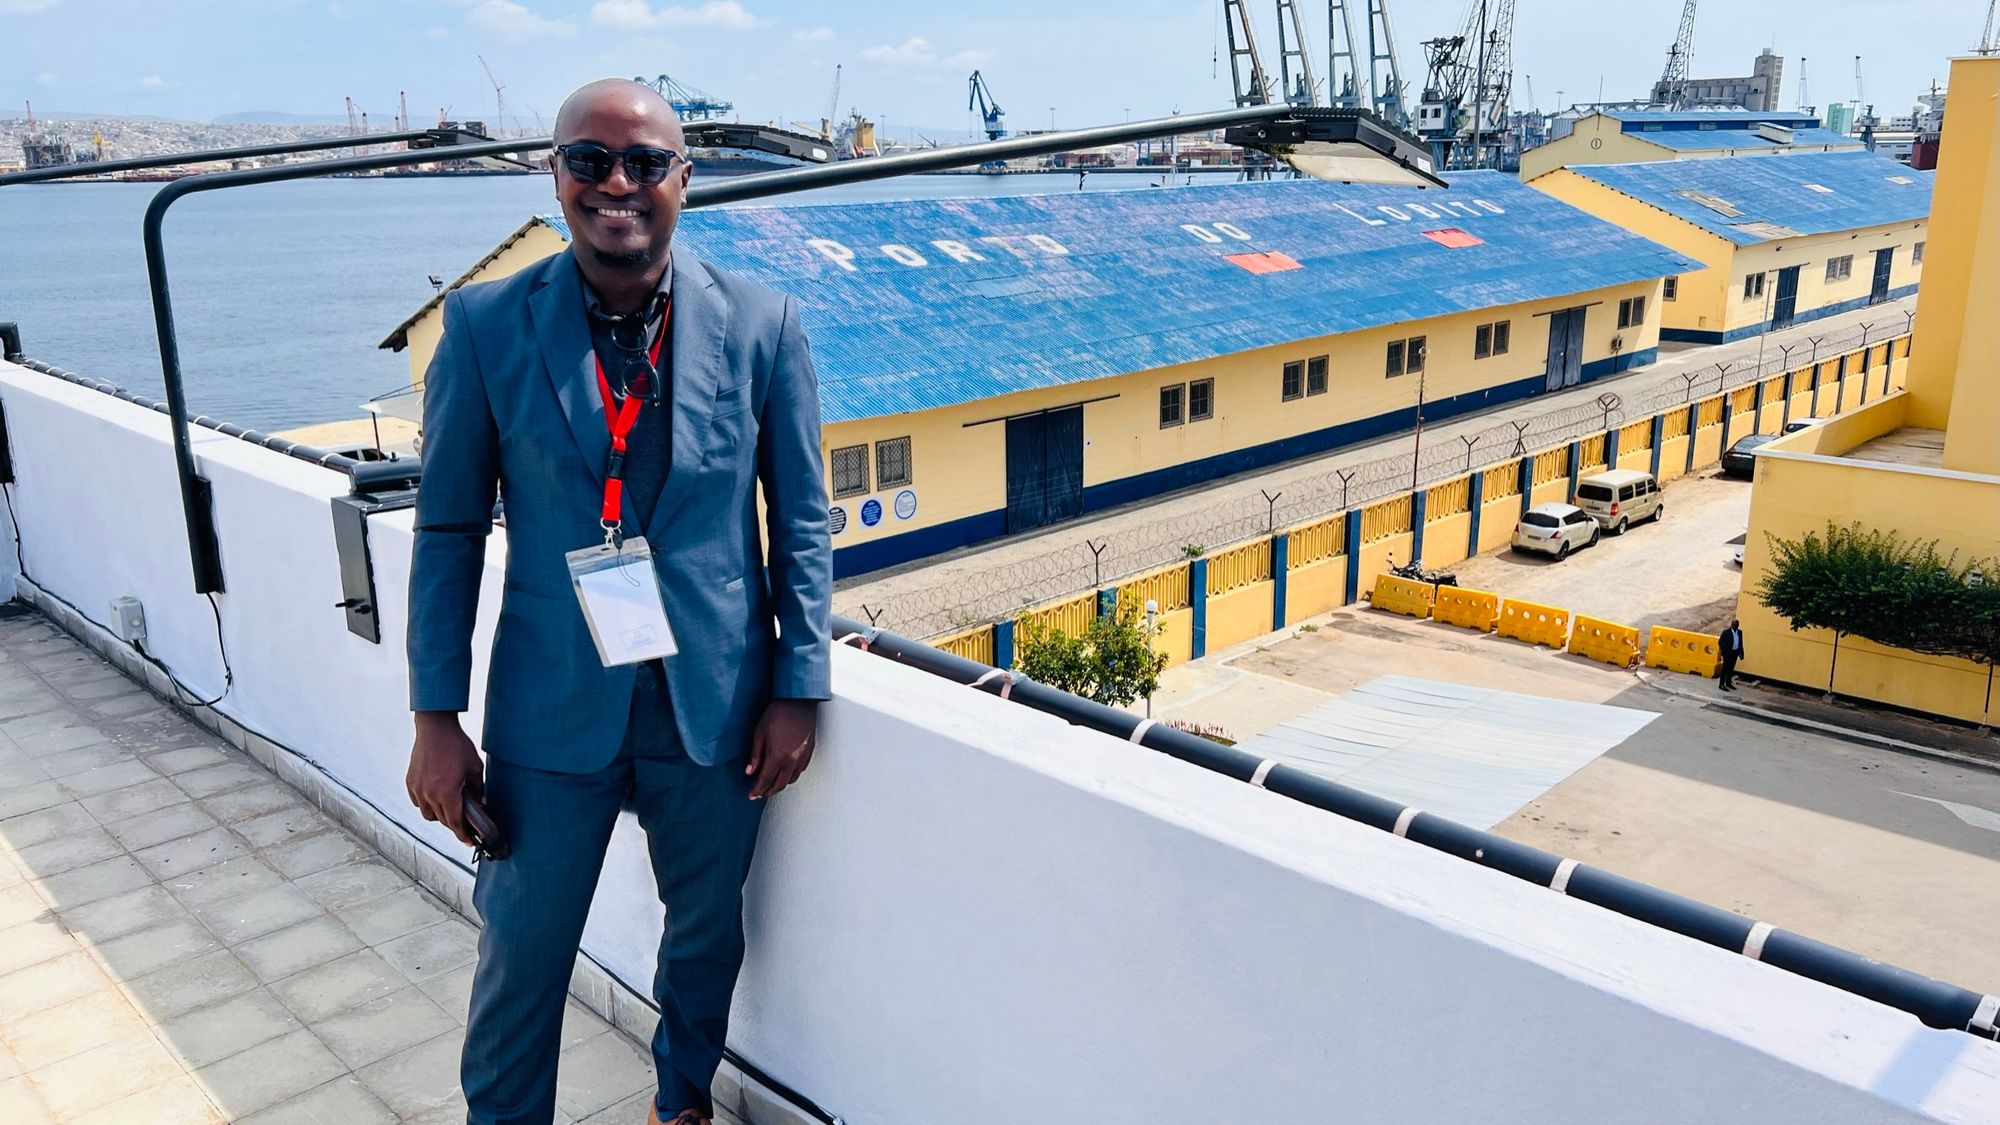 Photograph of me standing on a rooftop at the Port of Lobito in Angola.